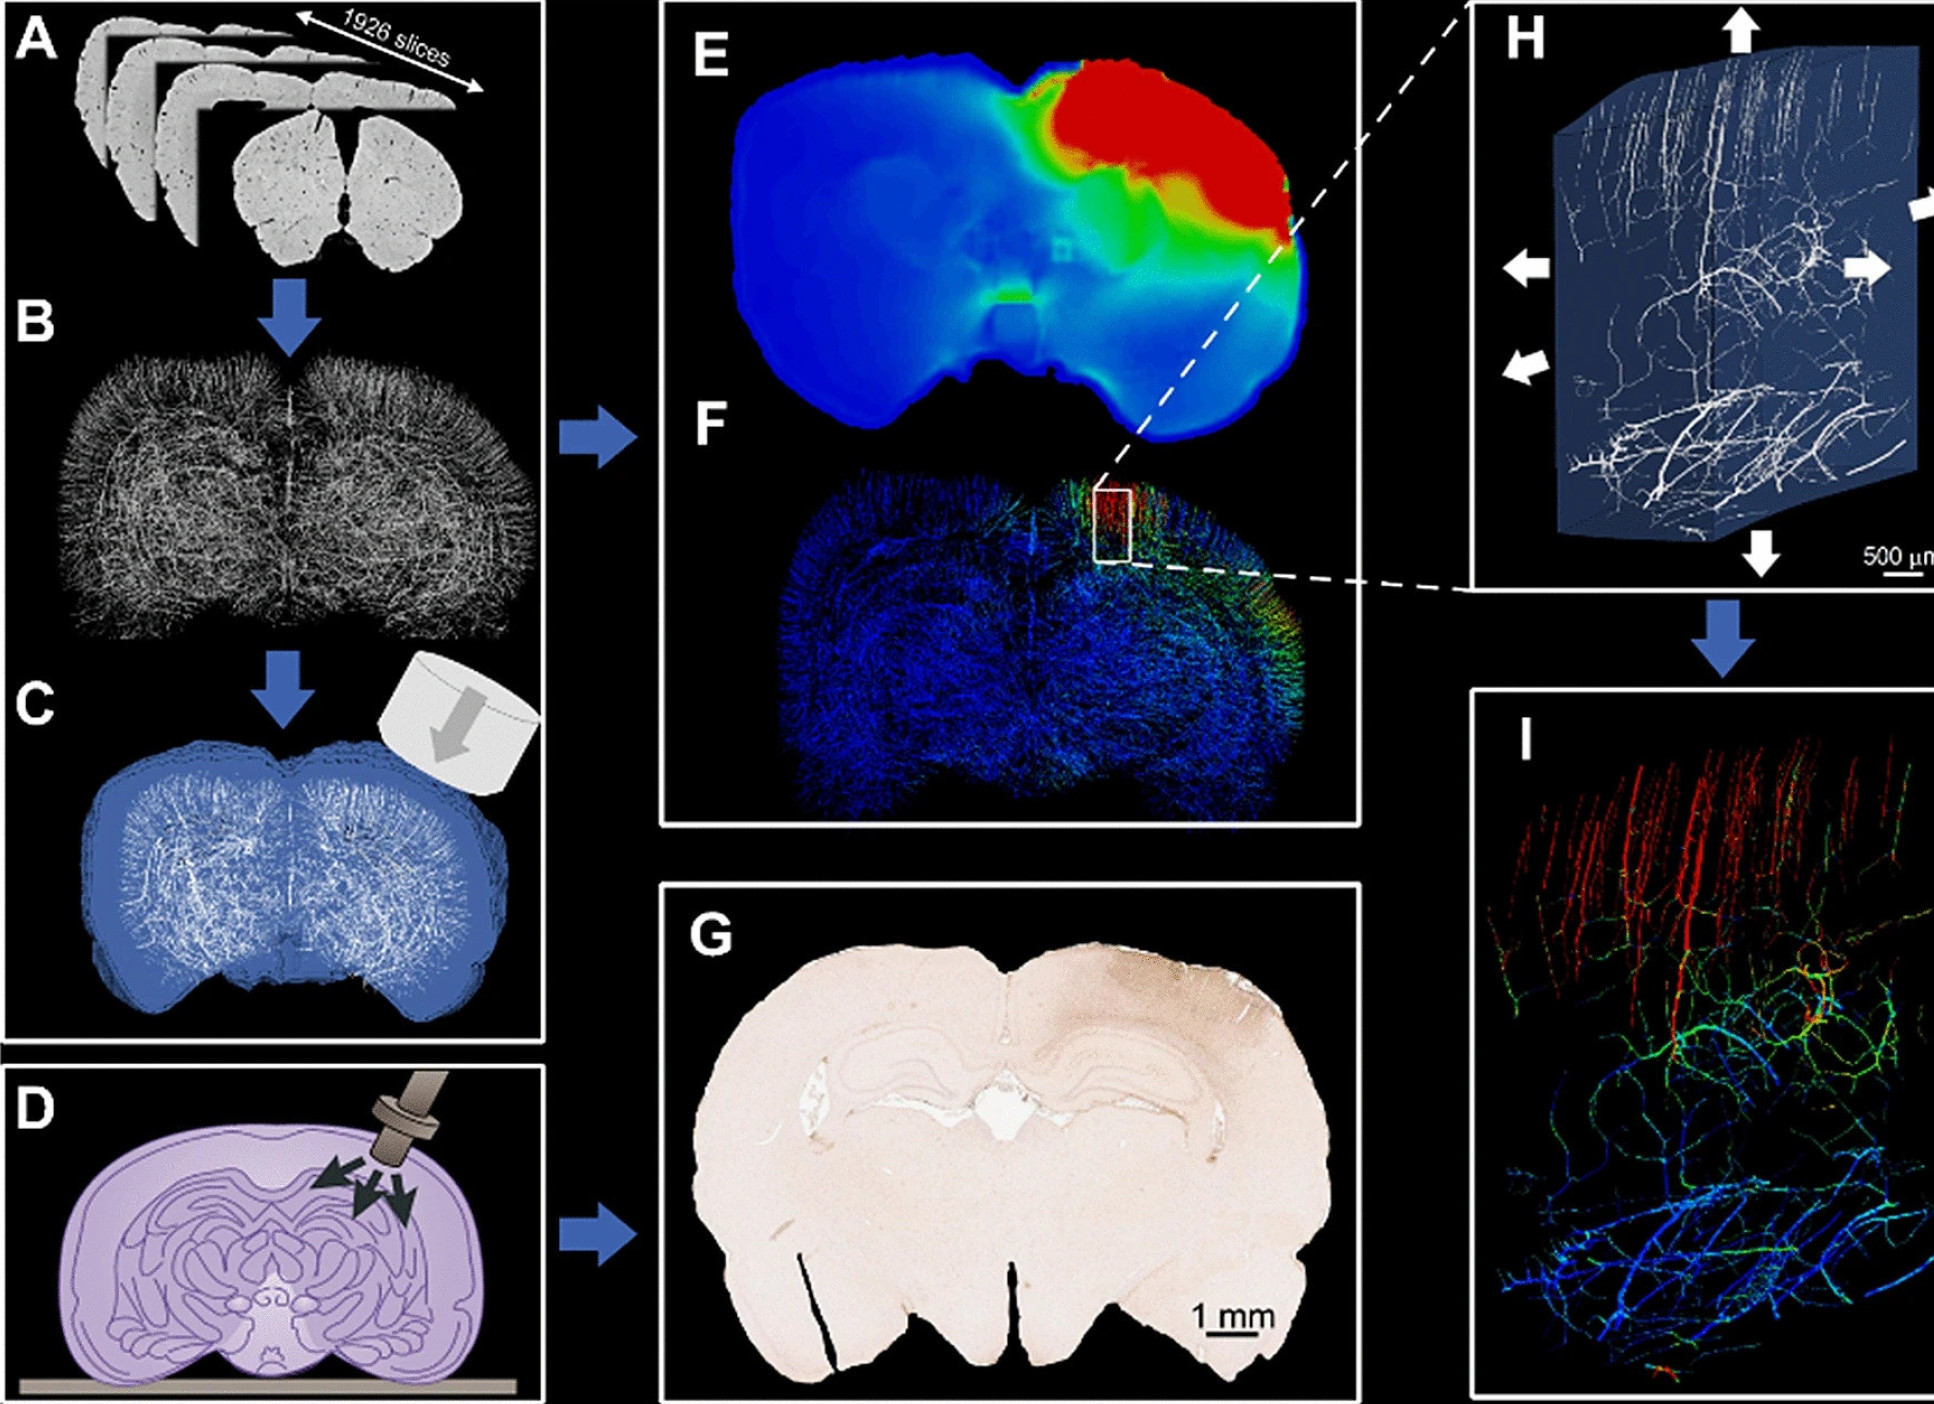 Brain images captured in a variety of ways